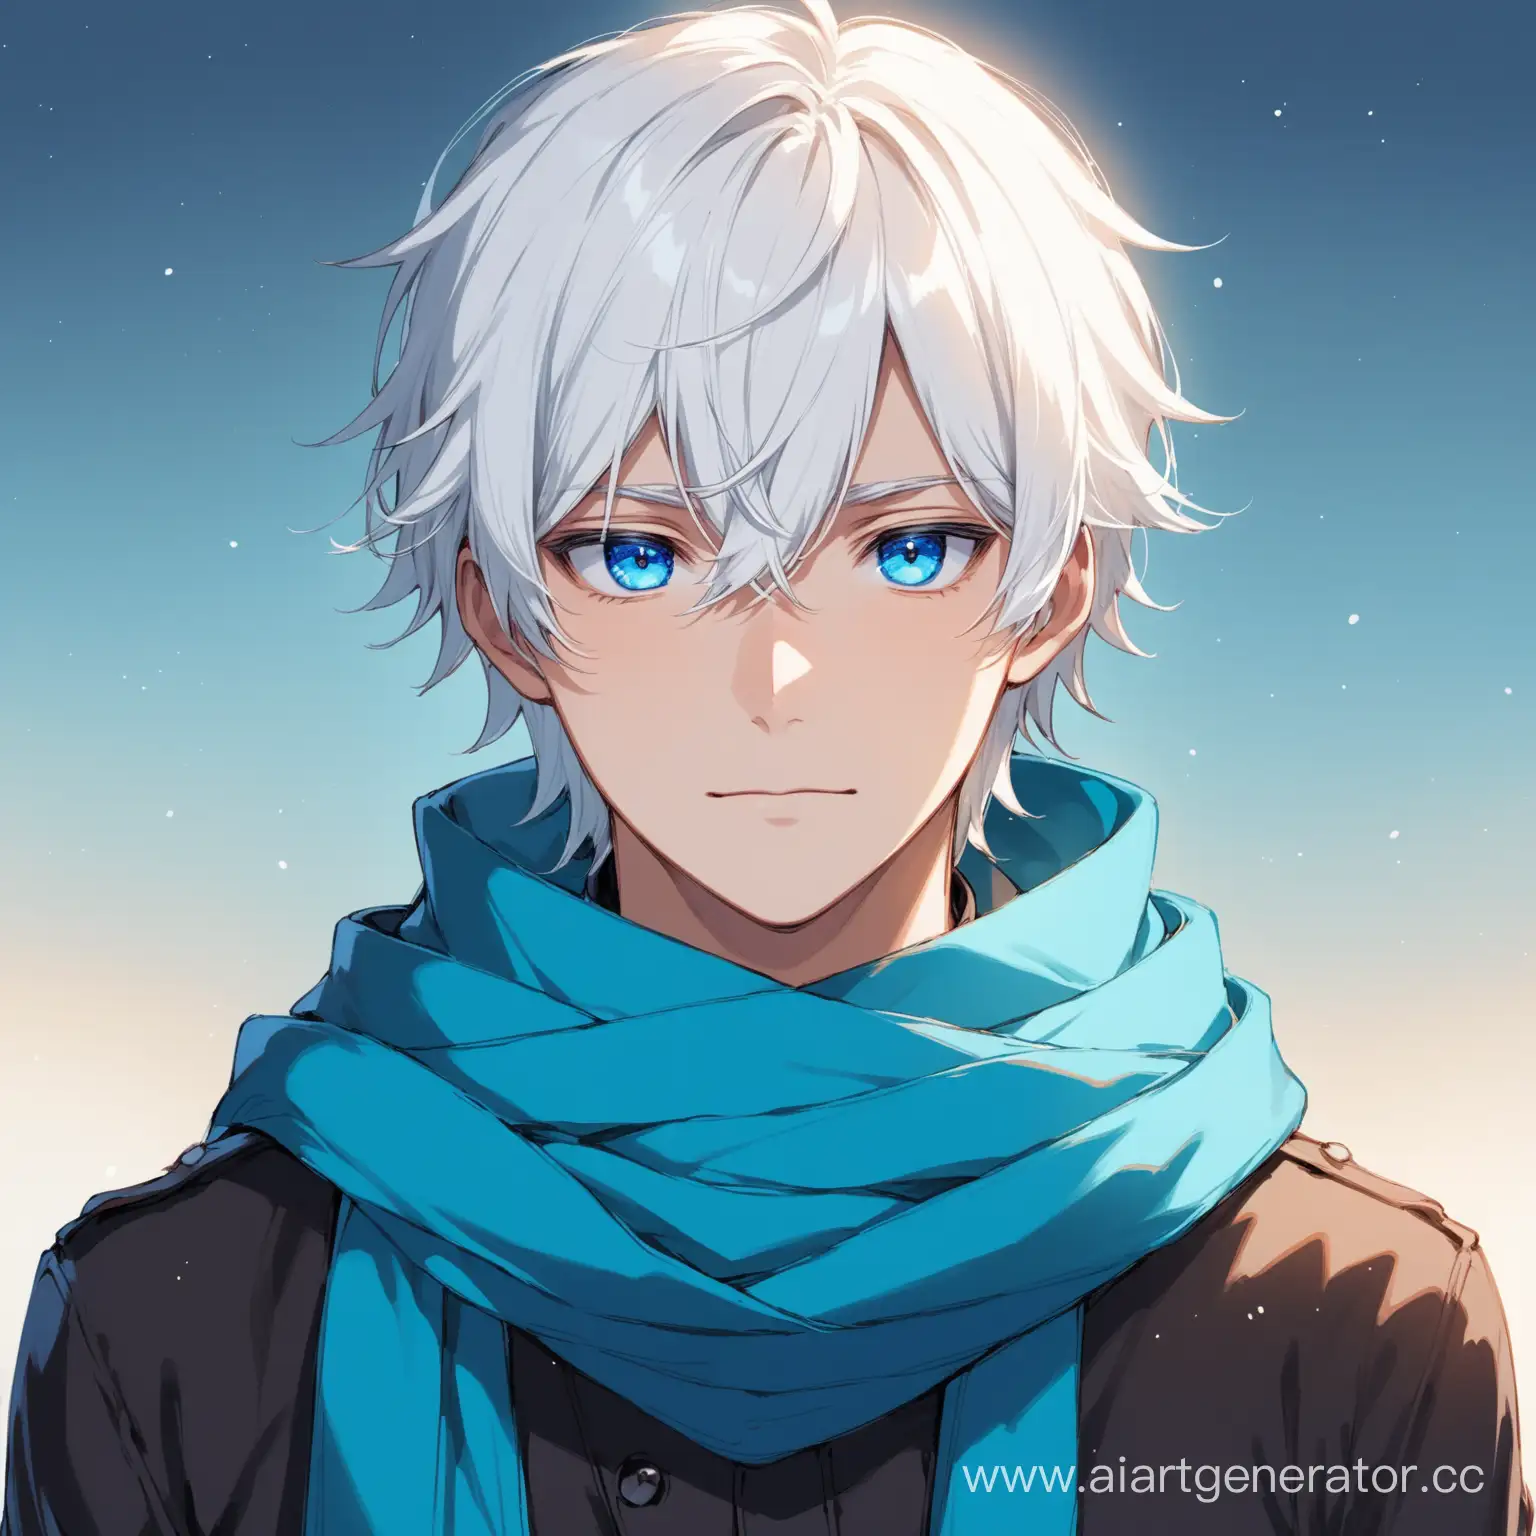 Serene-Solo-Portrait-Gentleman-with-White-Hair-and-Blue-Eyes-Wearing-a-Blue-Scarf